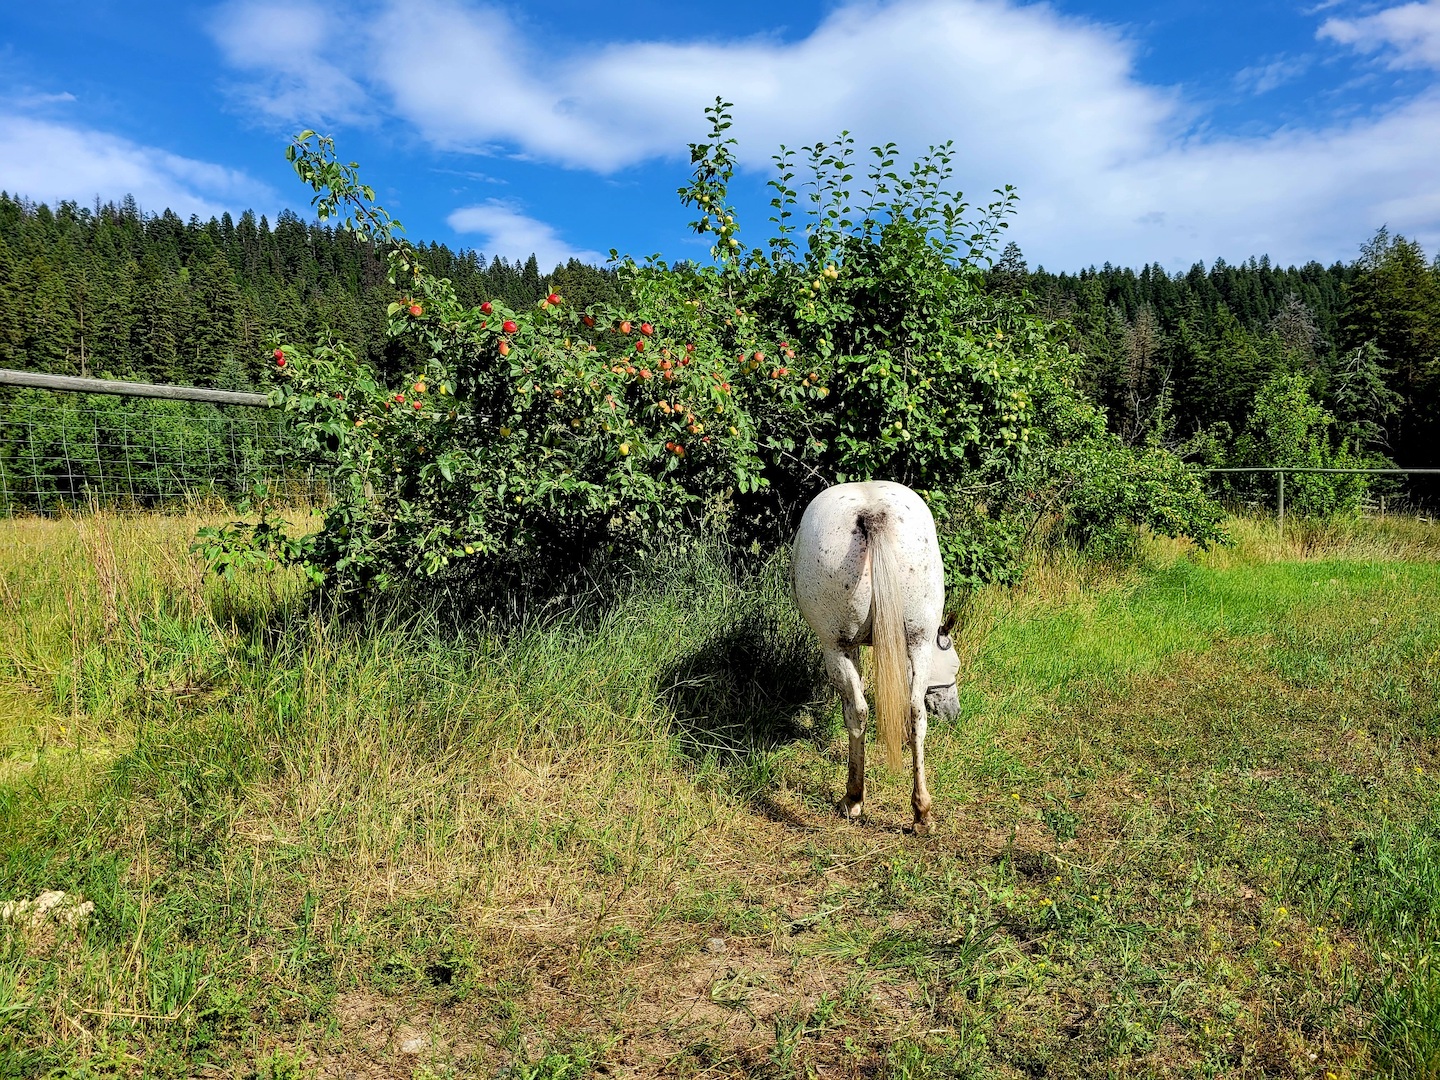 photo of a white horse's bum sticking out from under an apple tree, on a sunny day